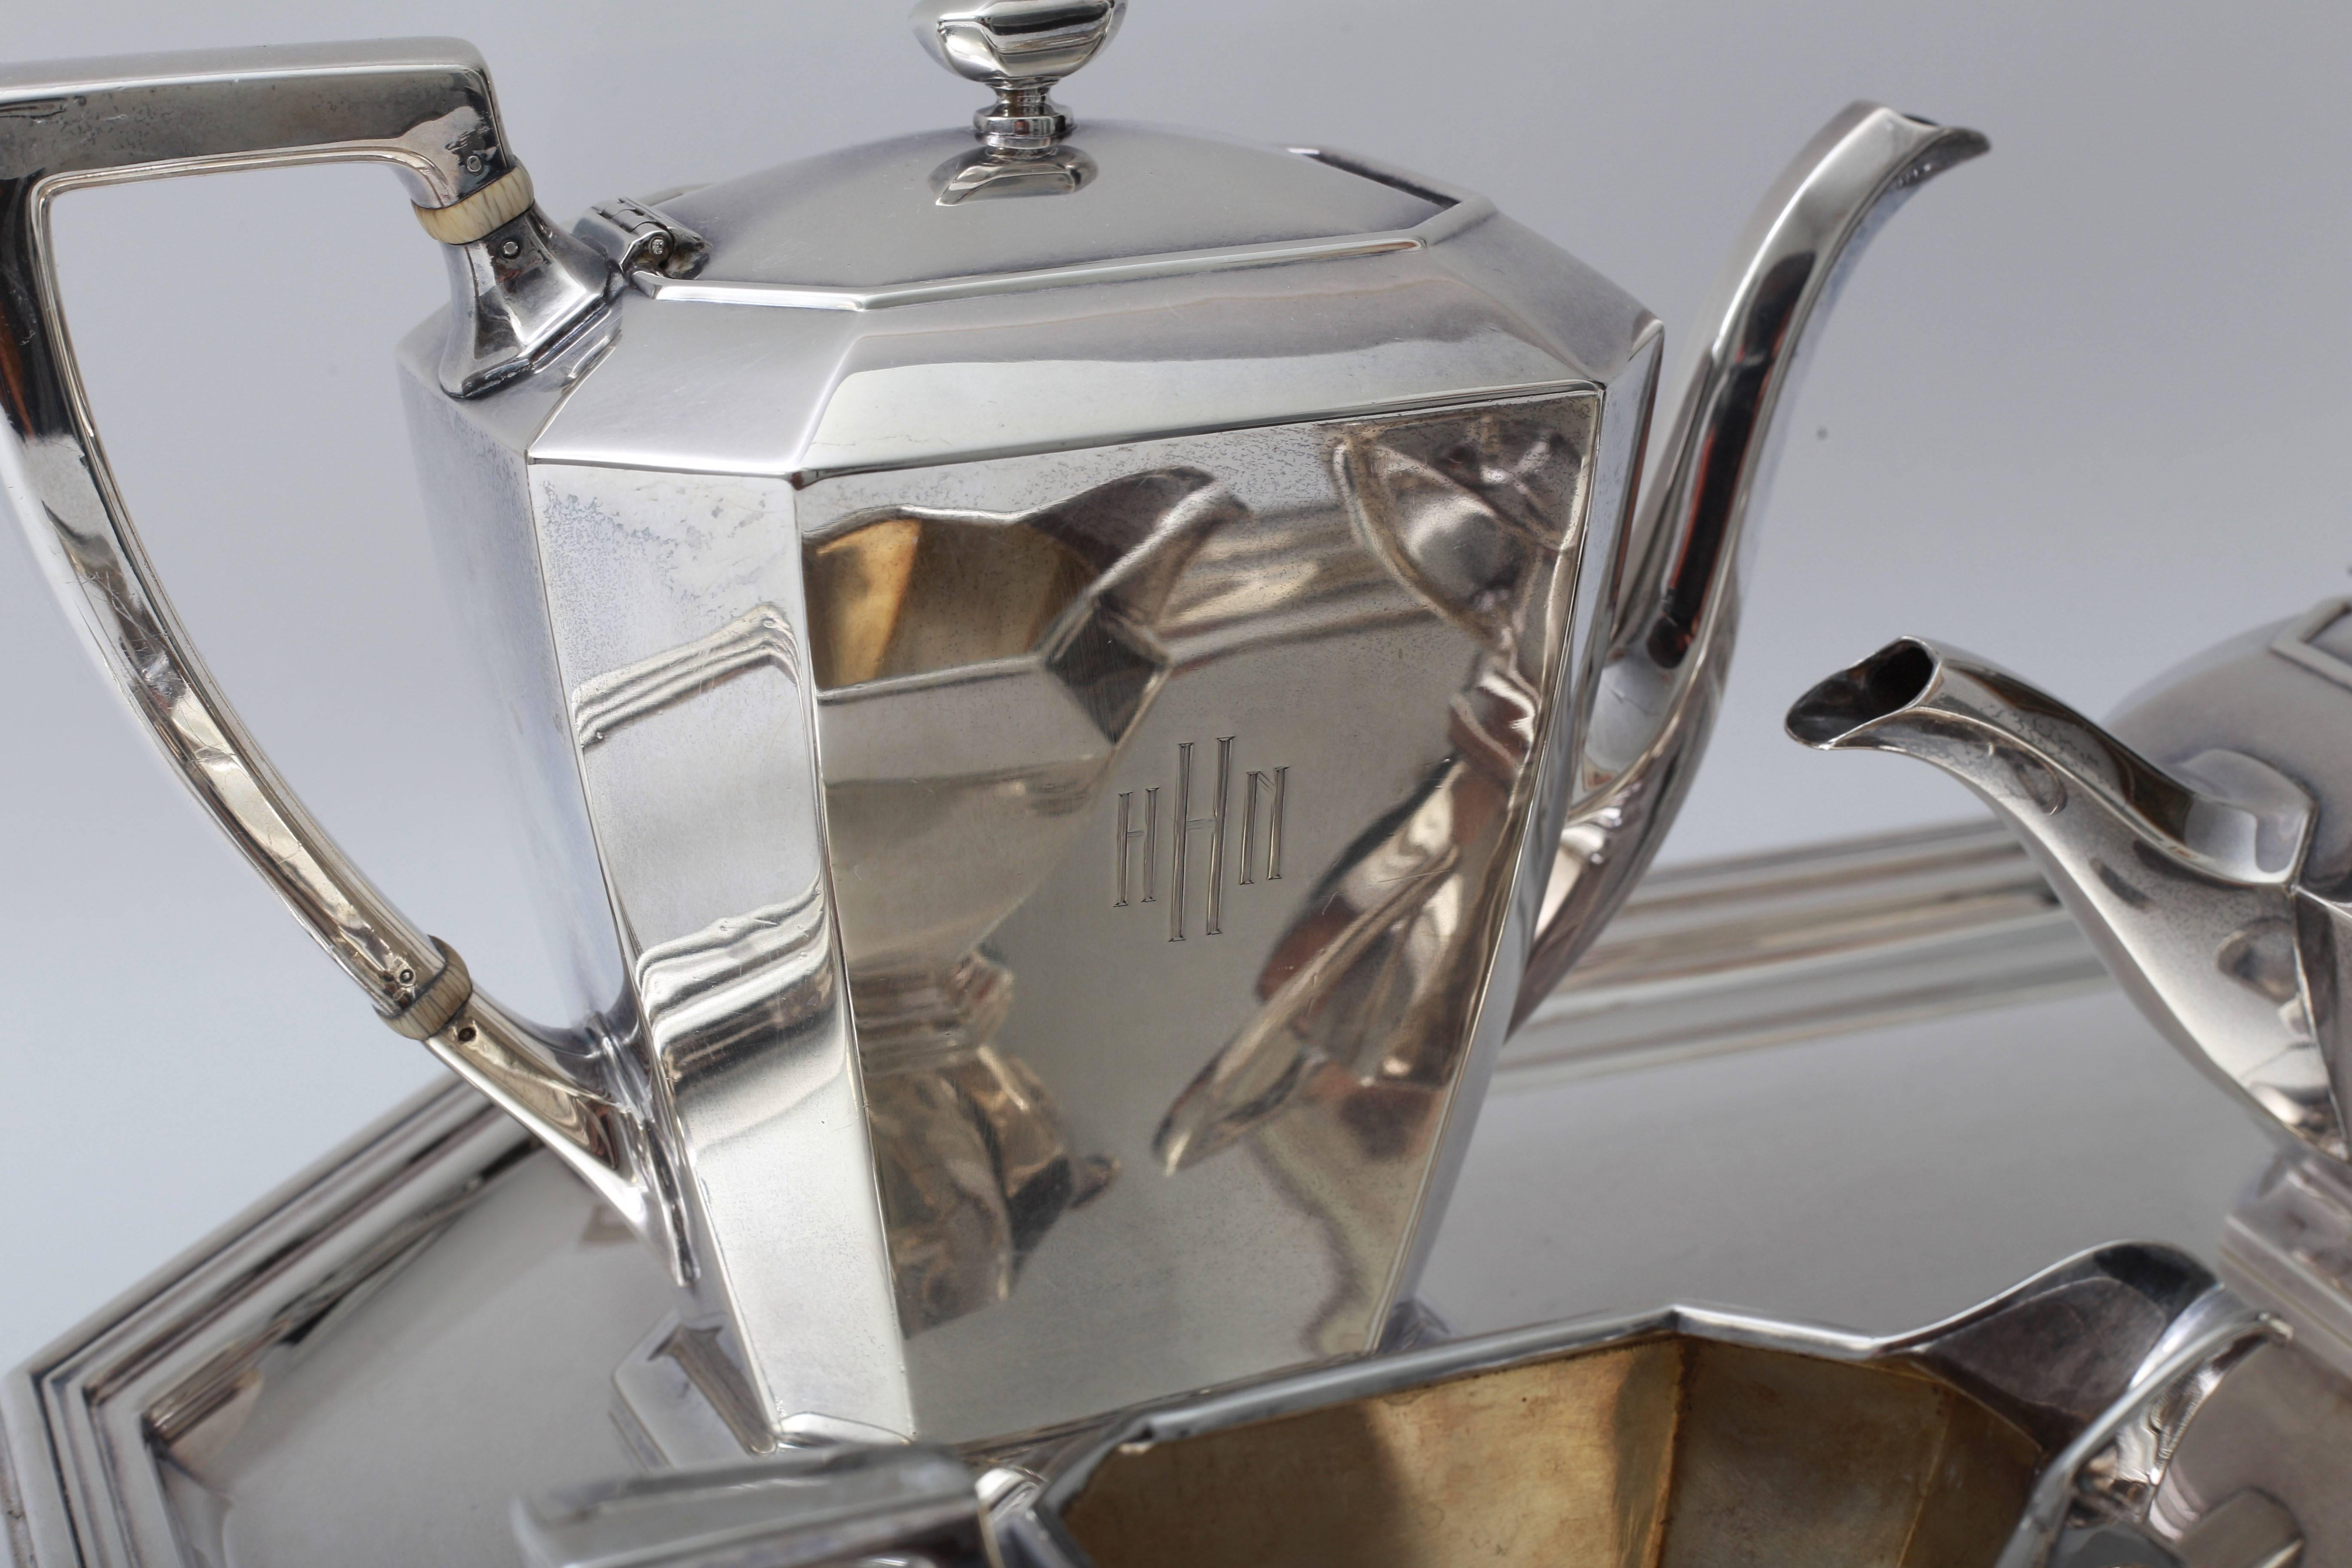 This stylish Art Deco period coffee service dates to the 1920s-1930s and was retailed by Black Star and Frost jewelers. The creamer, sugar, coffee and tea pieces are sterling silver and the tray is silver plated. 

Note: The Black Star & Frost